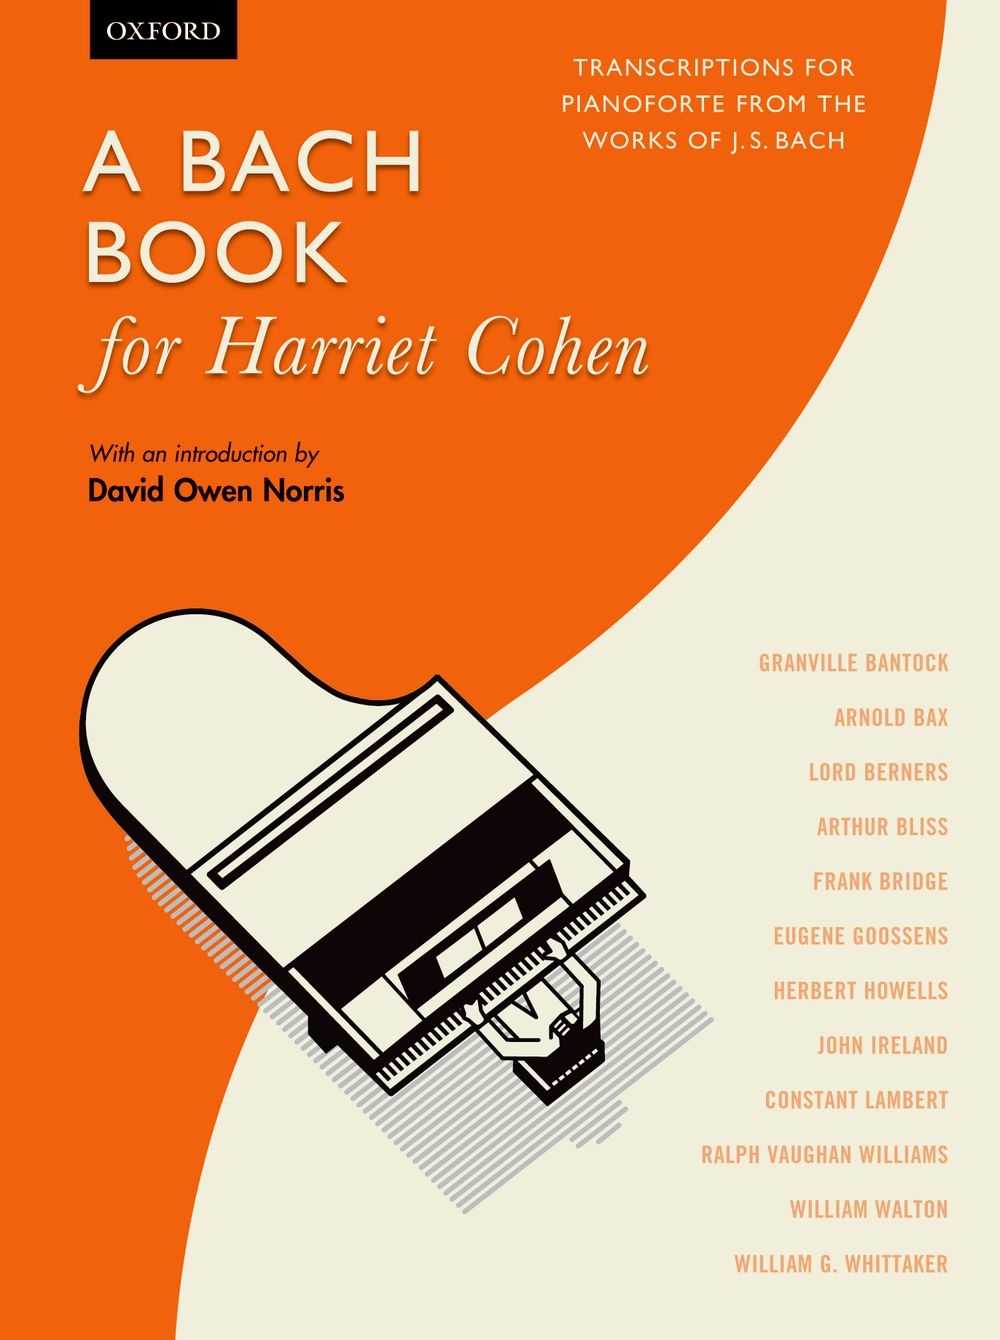 A BACH BOOK FOR HARRIET COHEN: TRANSCRIPTIONS FOR PIANOFORTE FROM THE WORKS OF J. S. BACH